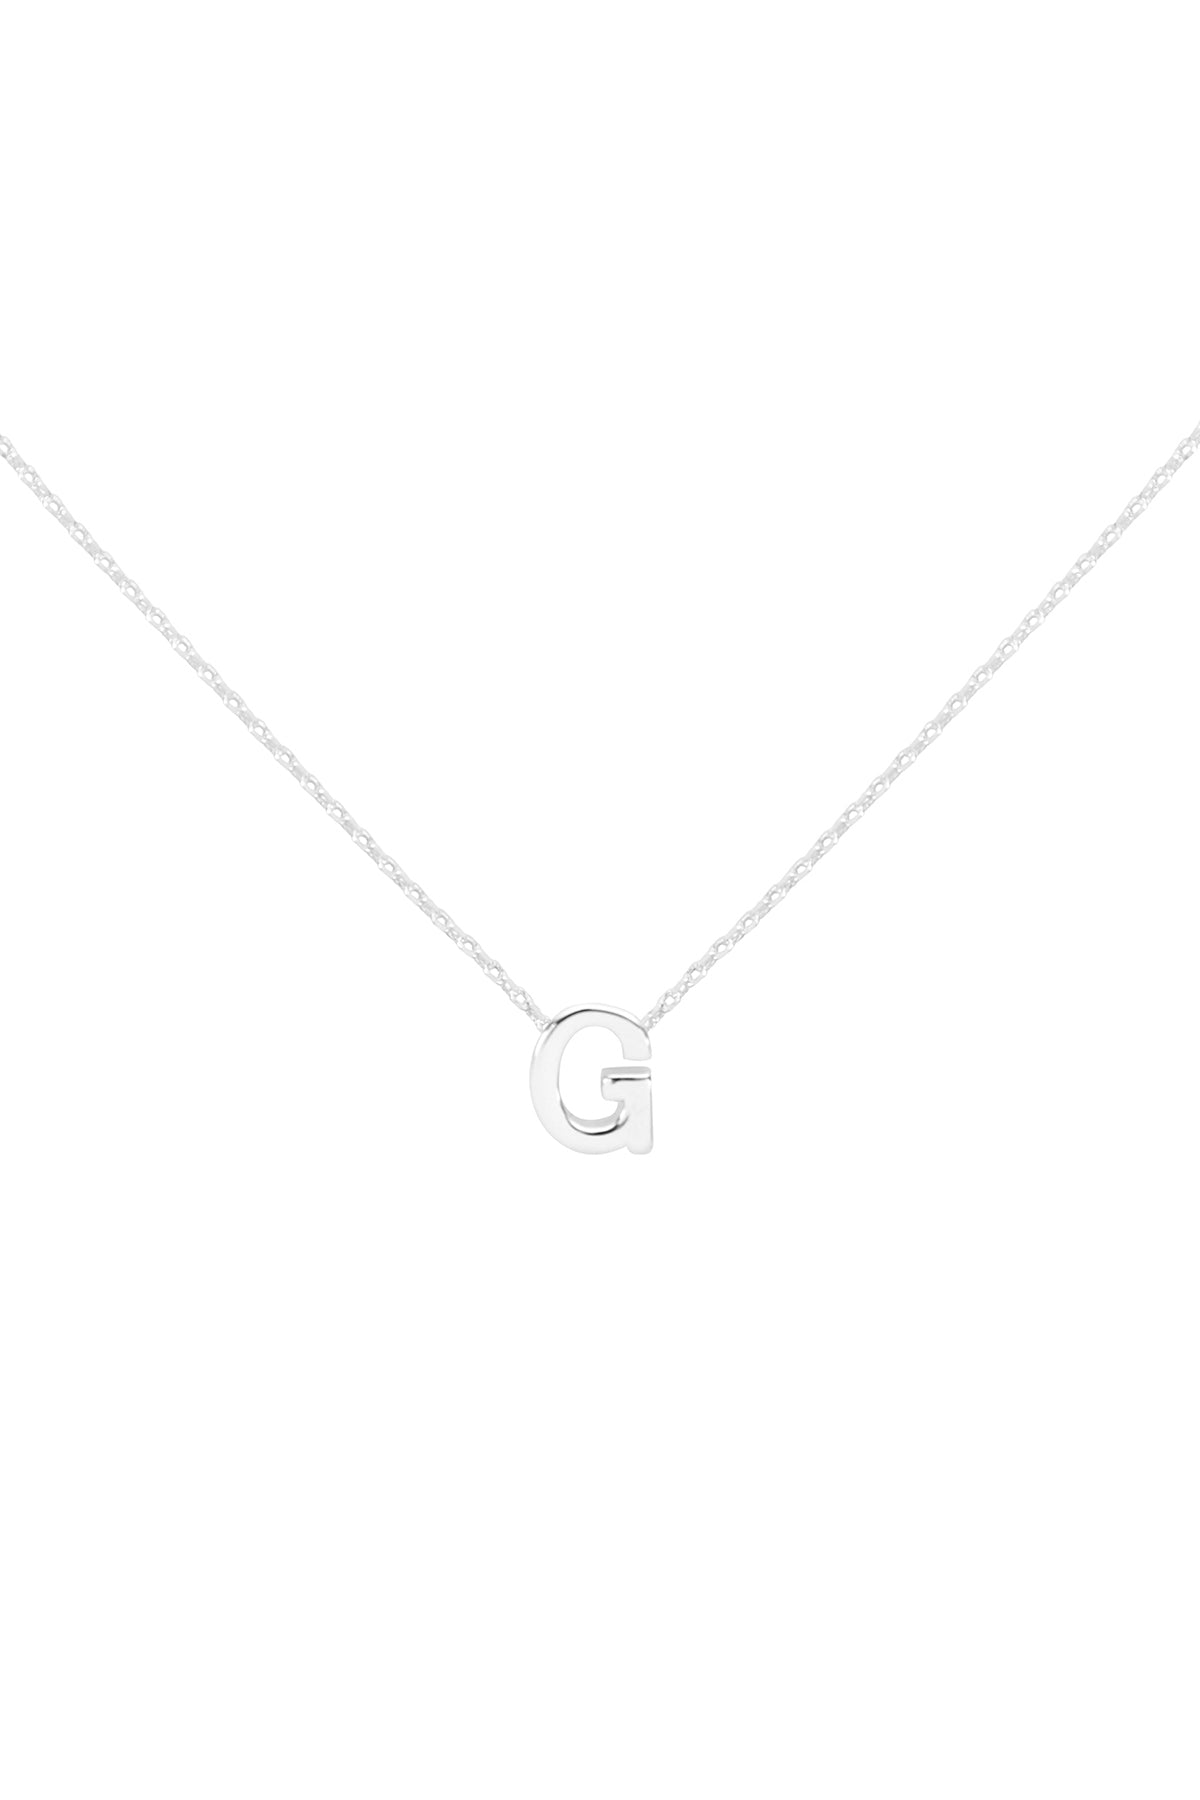 "G" INITIAL DAINTY CHARM NECKLACE